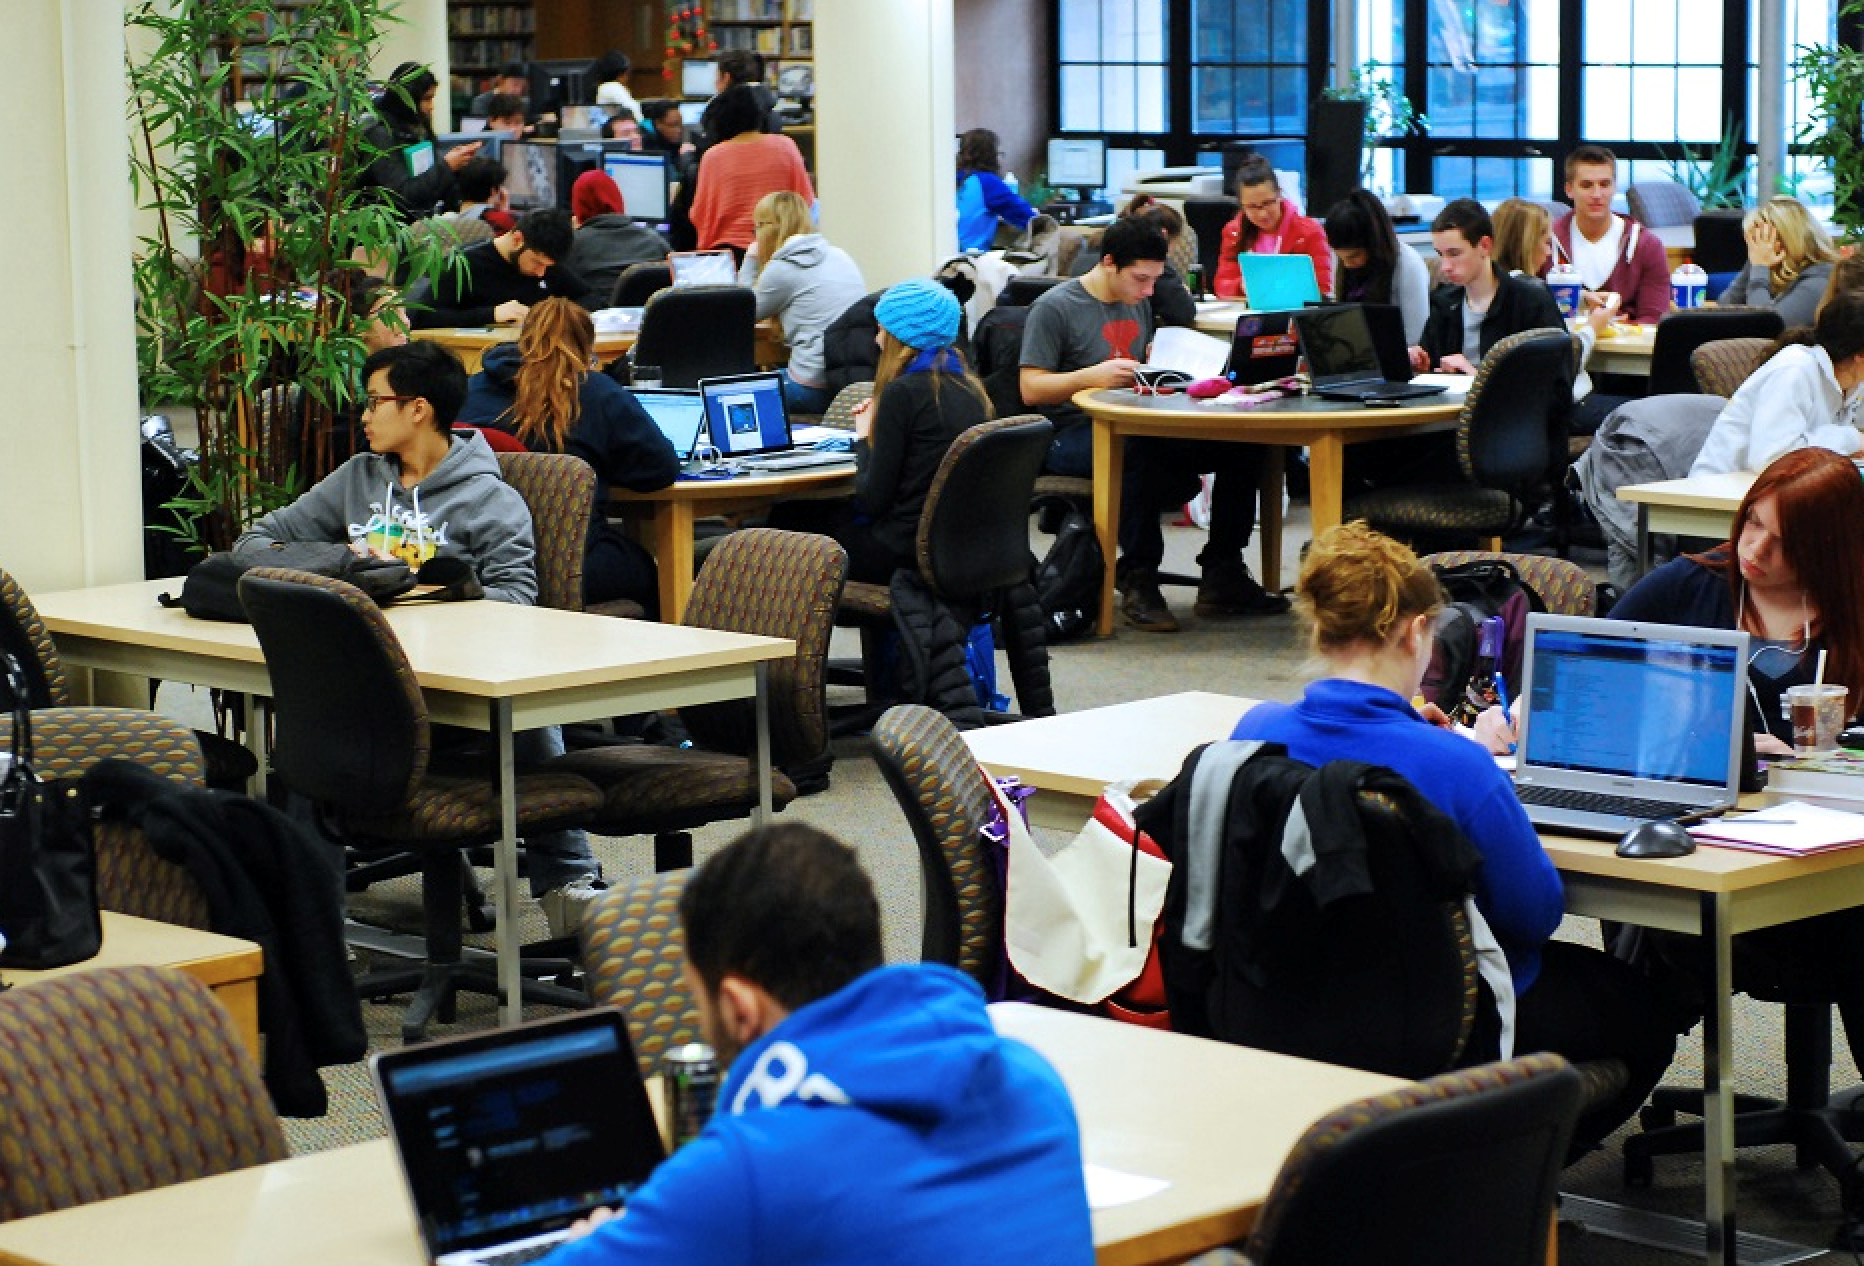 Photograph from the University of Detroit Mercy library. This photo shows a typical day for students who use the library.